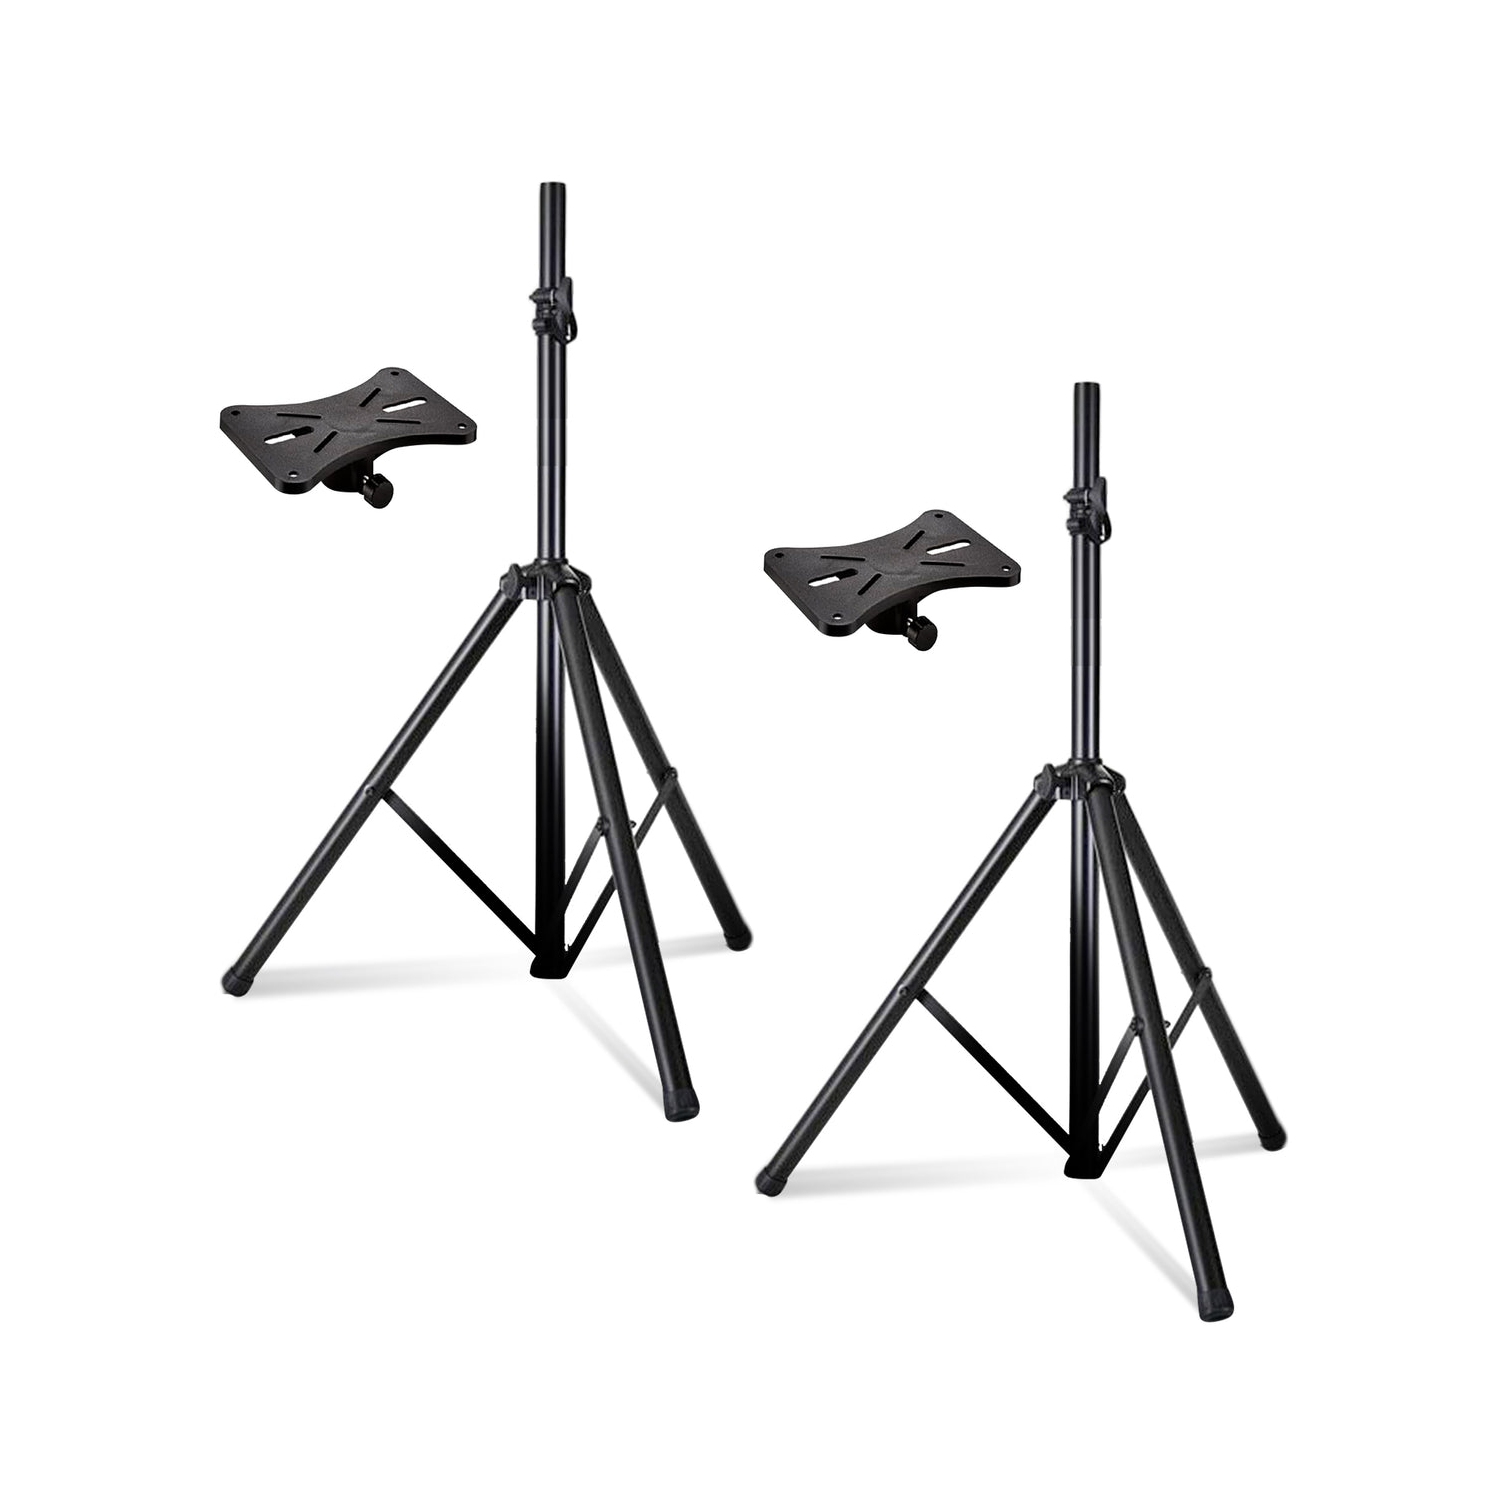 5 Core Speakers Stands 2 Piece Black Height Adjustable Tripod PA Monitor Holder for Large Speakers DJ Stand Para Bocinas - SS ECO 2PK BLK WoB